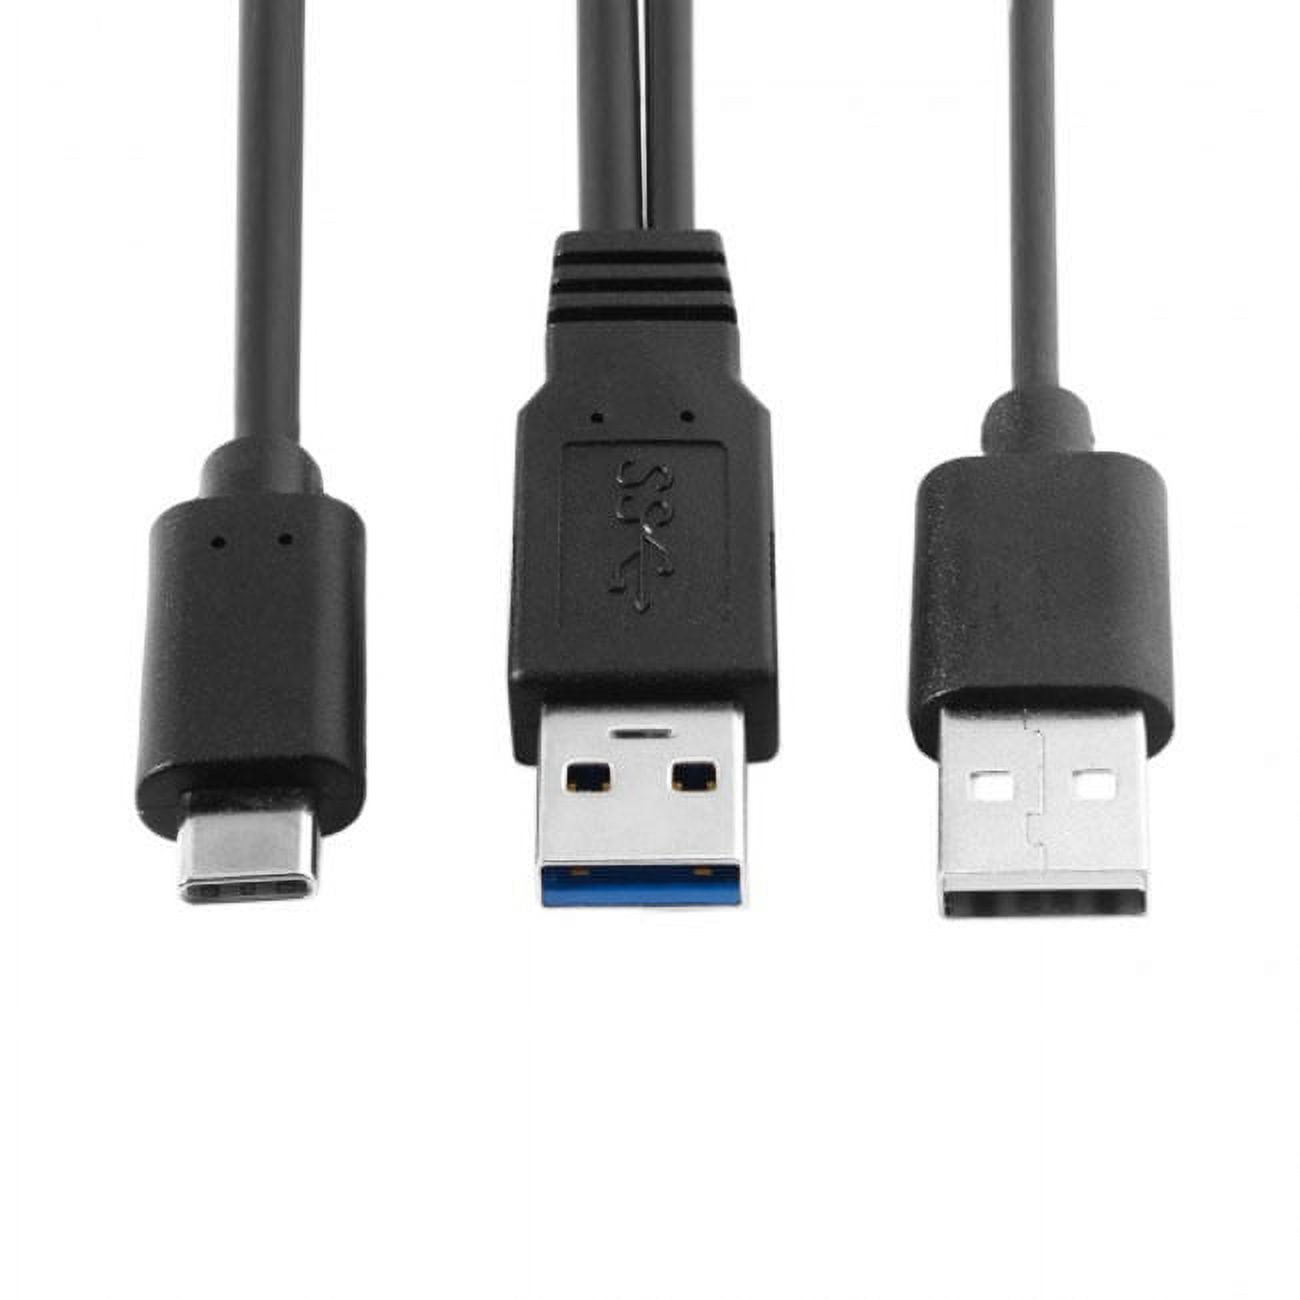 Waterproof USB Type C Male to USB 3.0 Male Overmolded Cable 50cm